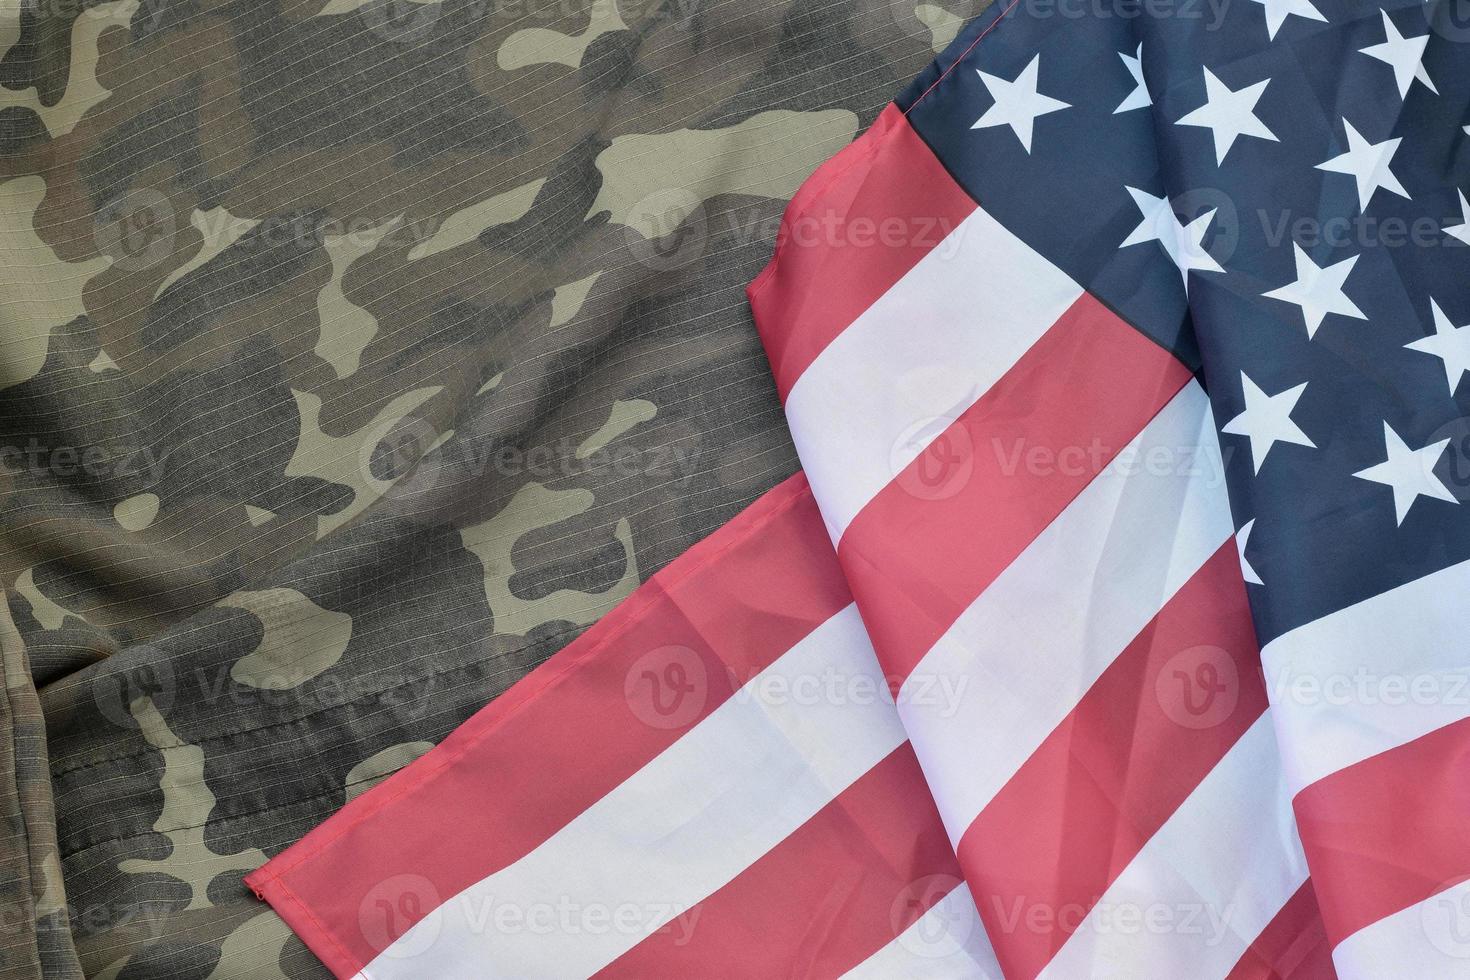 United States of America flag and folded military uniform jacket. Military symbols conceptual background banner for american patriotic holidays photo